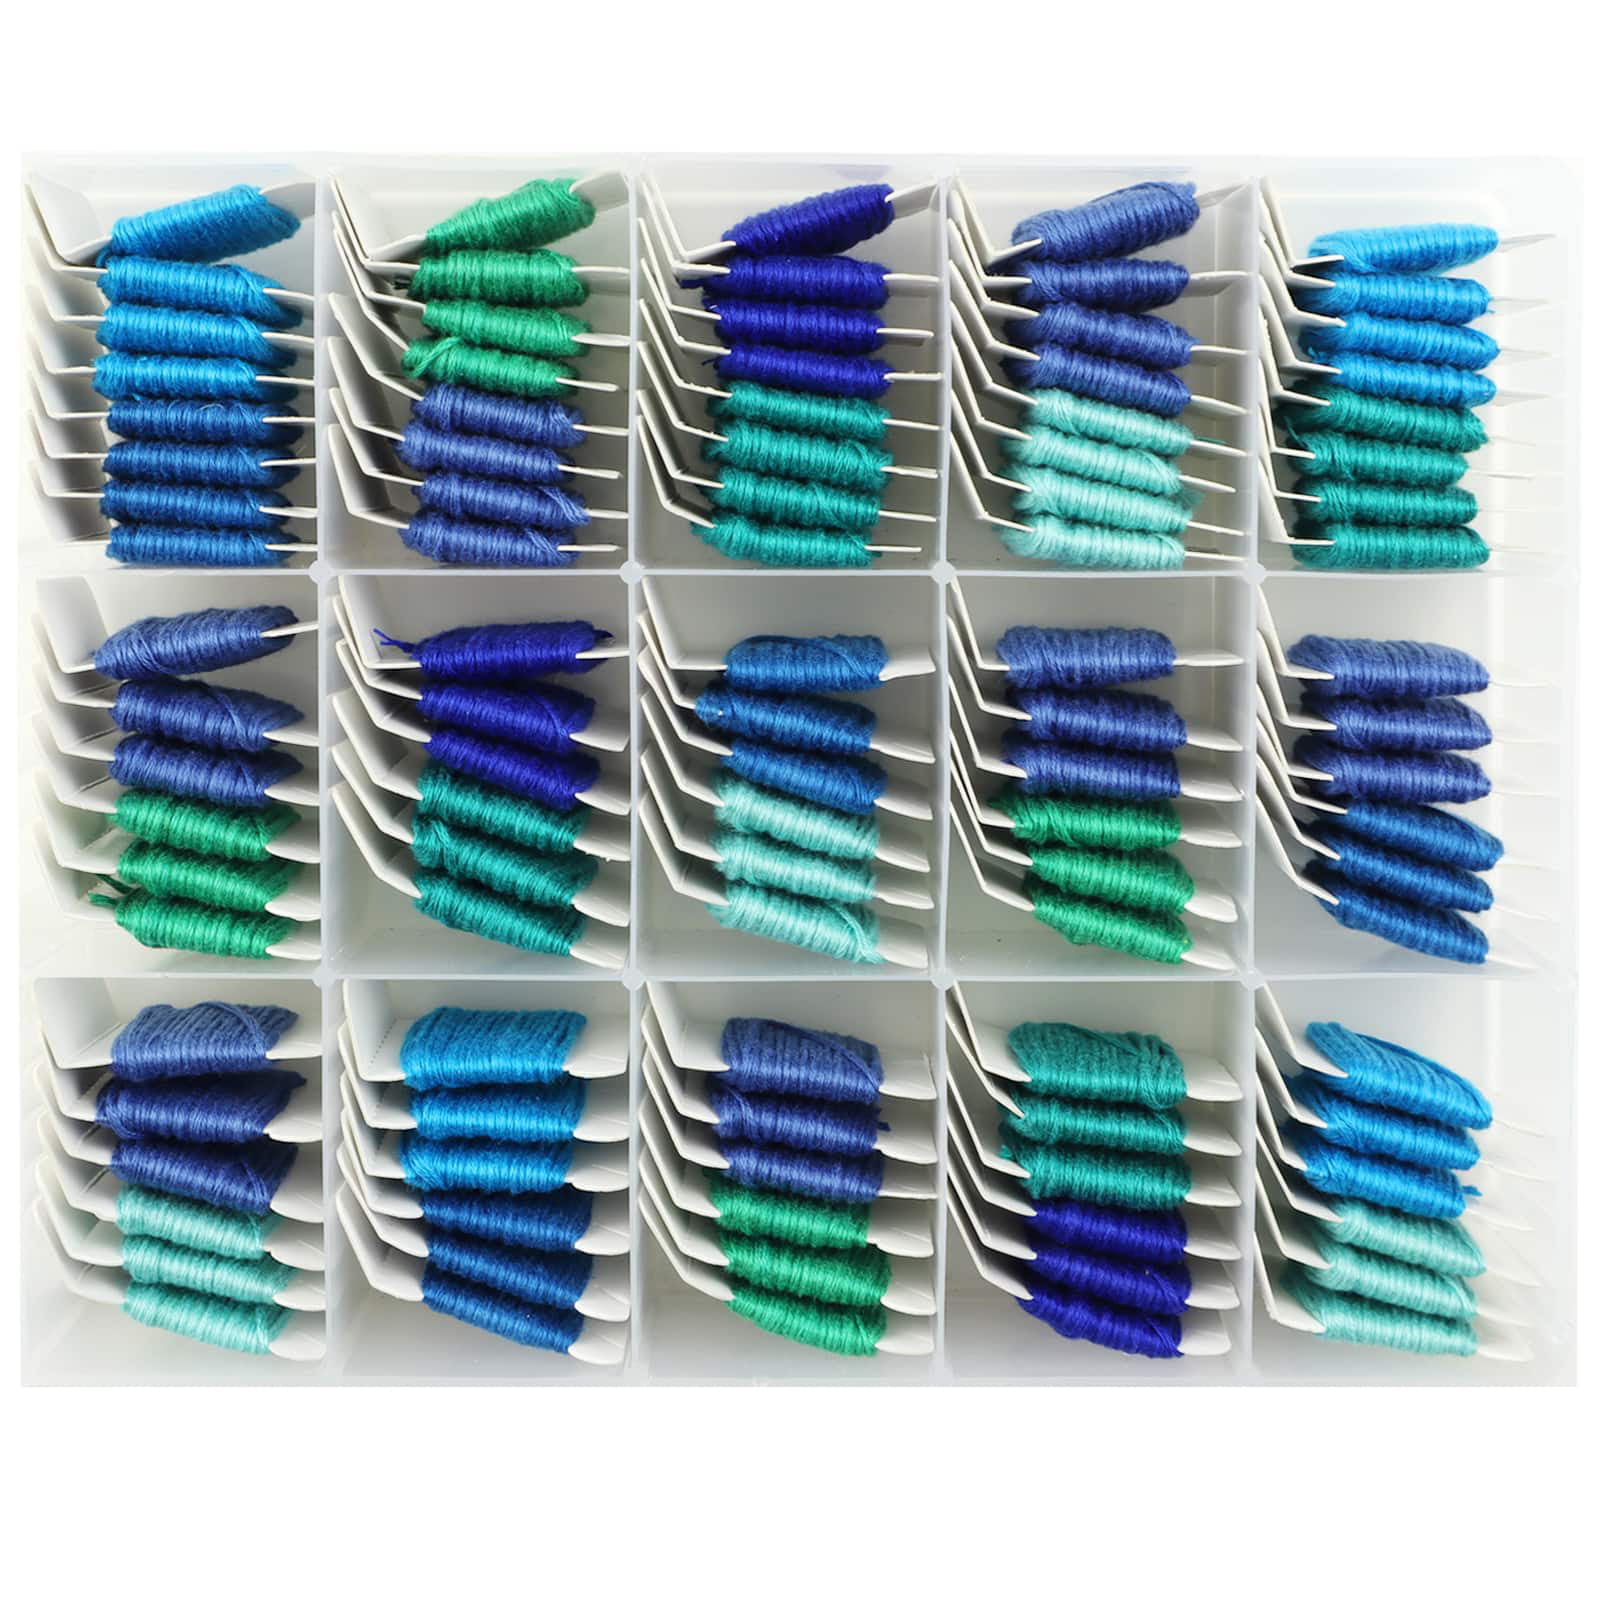 Embroidery Floss Organizer Kit by Loops & Threads®, 100ct